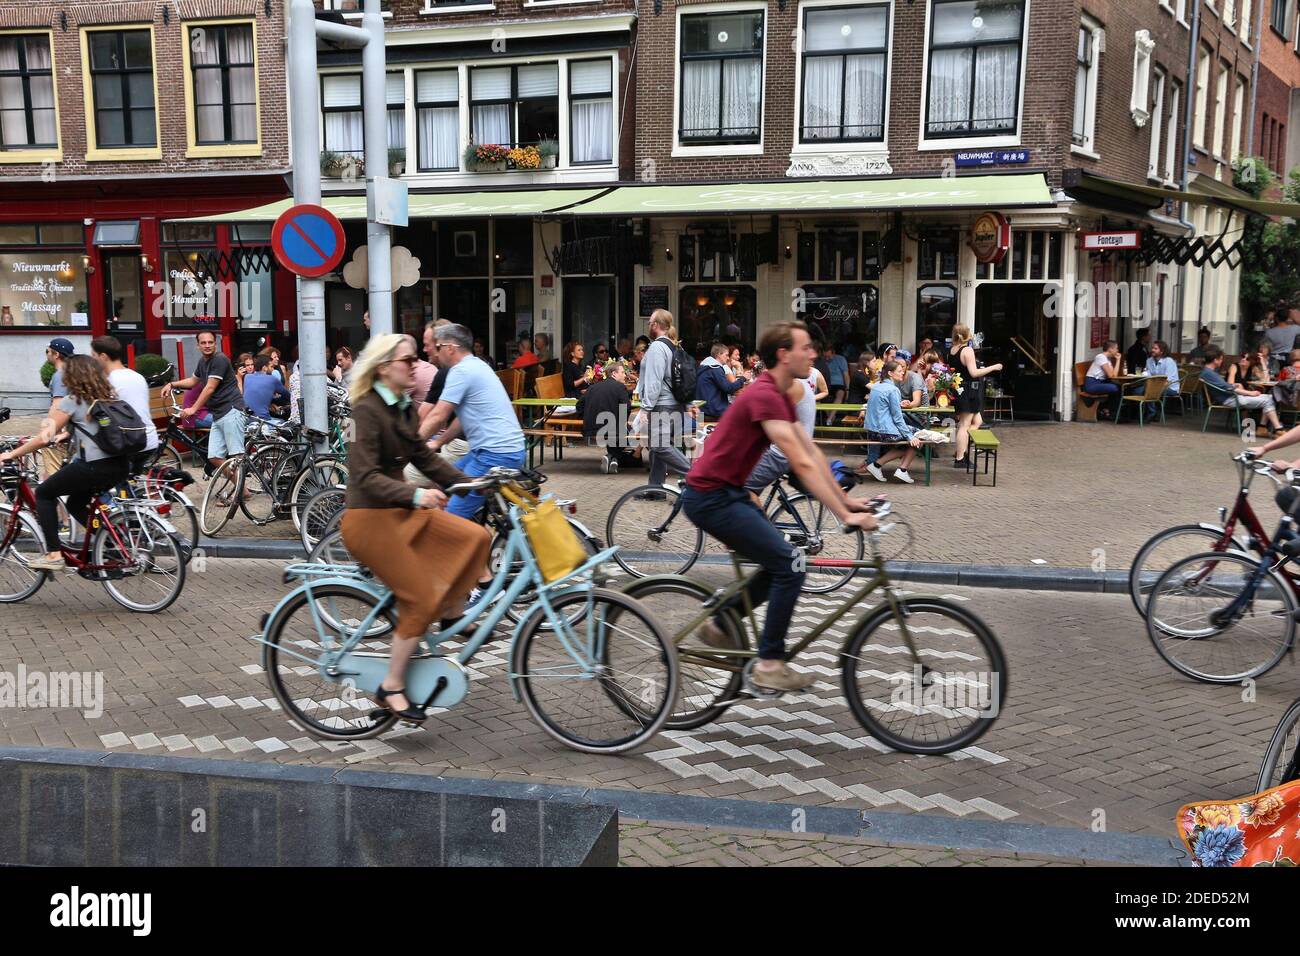 AMSTERDAM, NETHERLANDS - JULY 8, 2017: People visit Nieuwmarkt square in Amsterdam, Netherlands. Amsterdam is the capital city of The Netherlands. Stock Photo